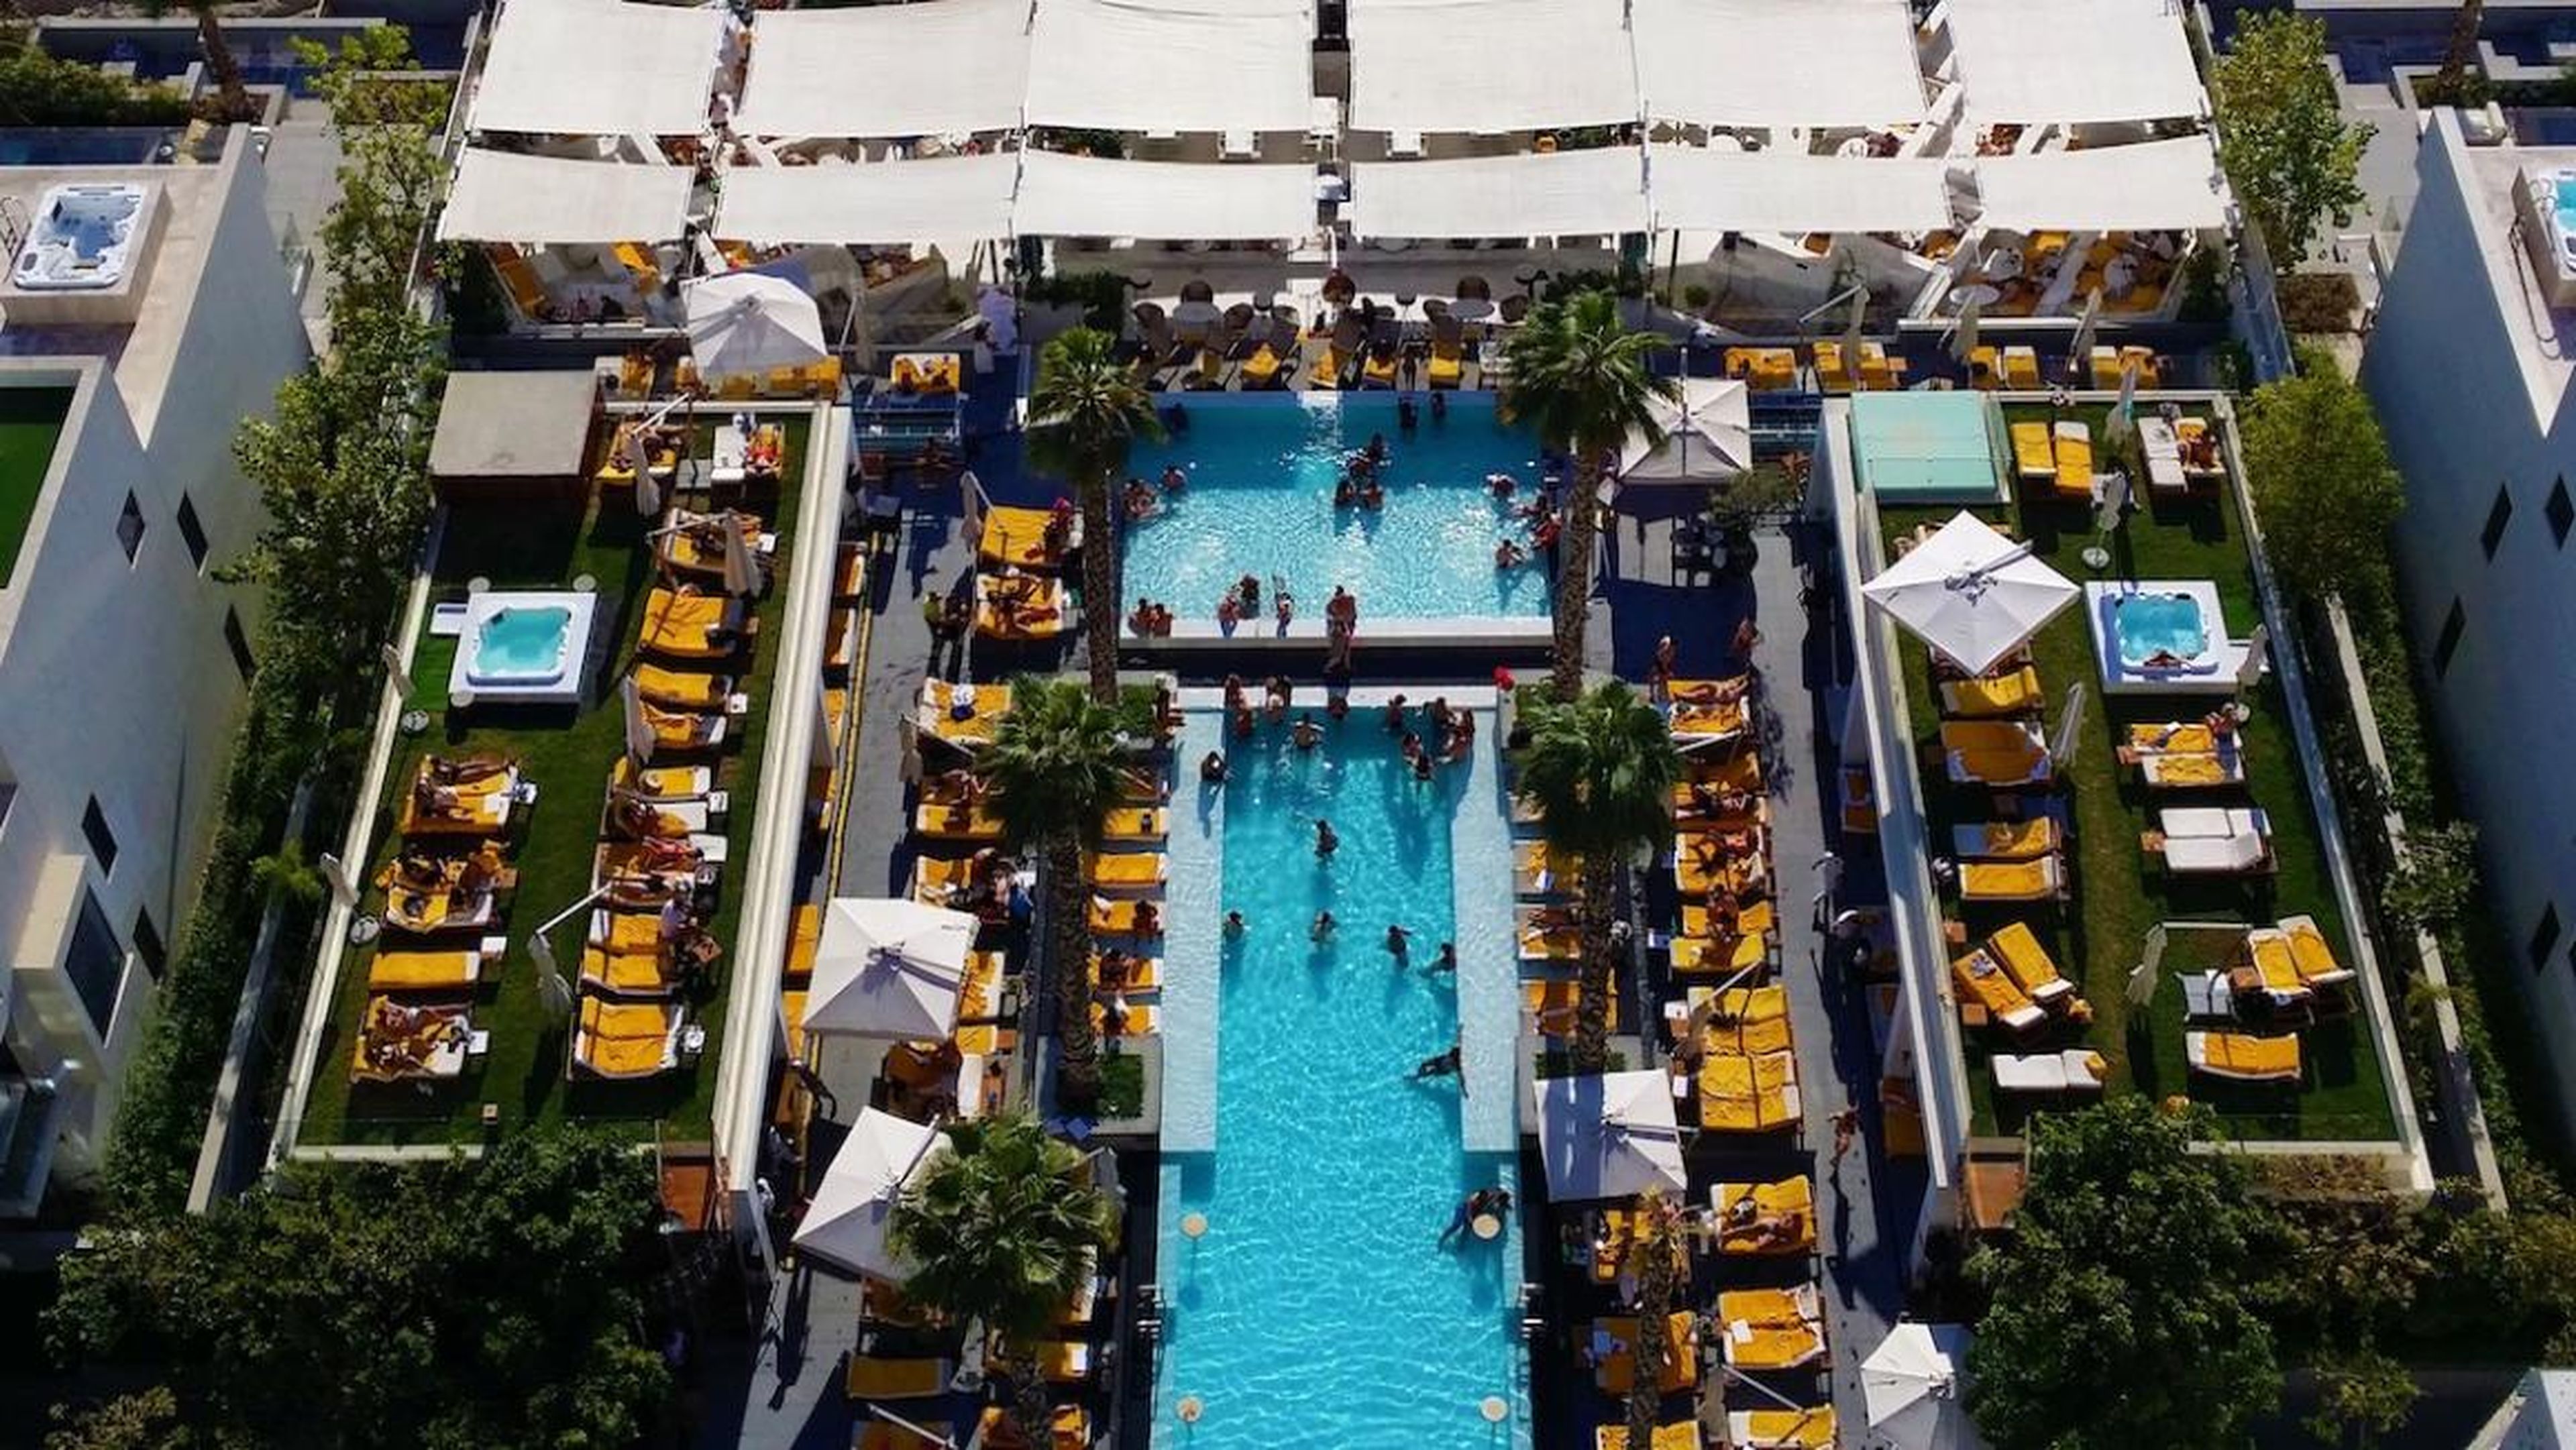 Pool parties at places such as the Five Palm Jumeirah are popular 365 days a year in Dubai.